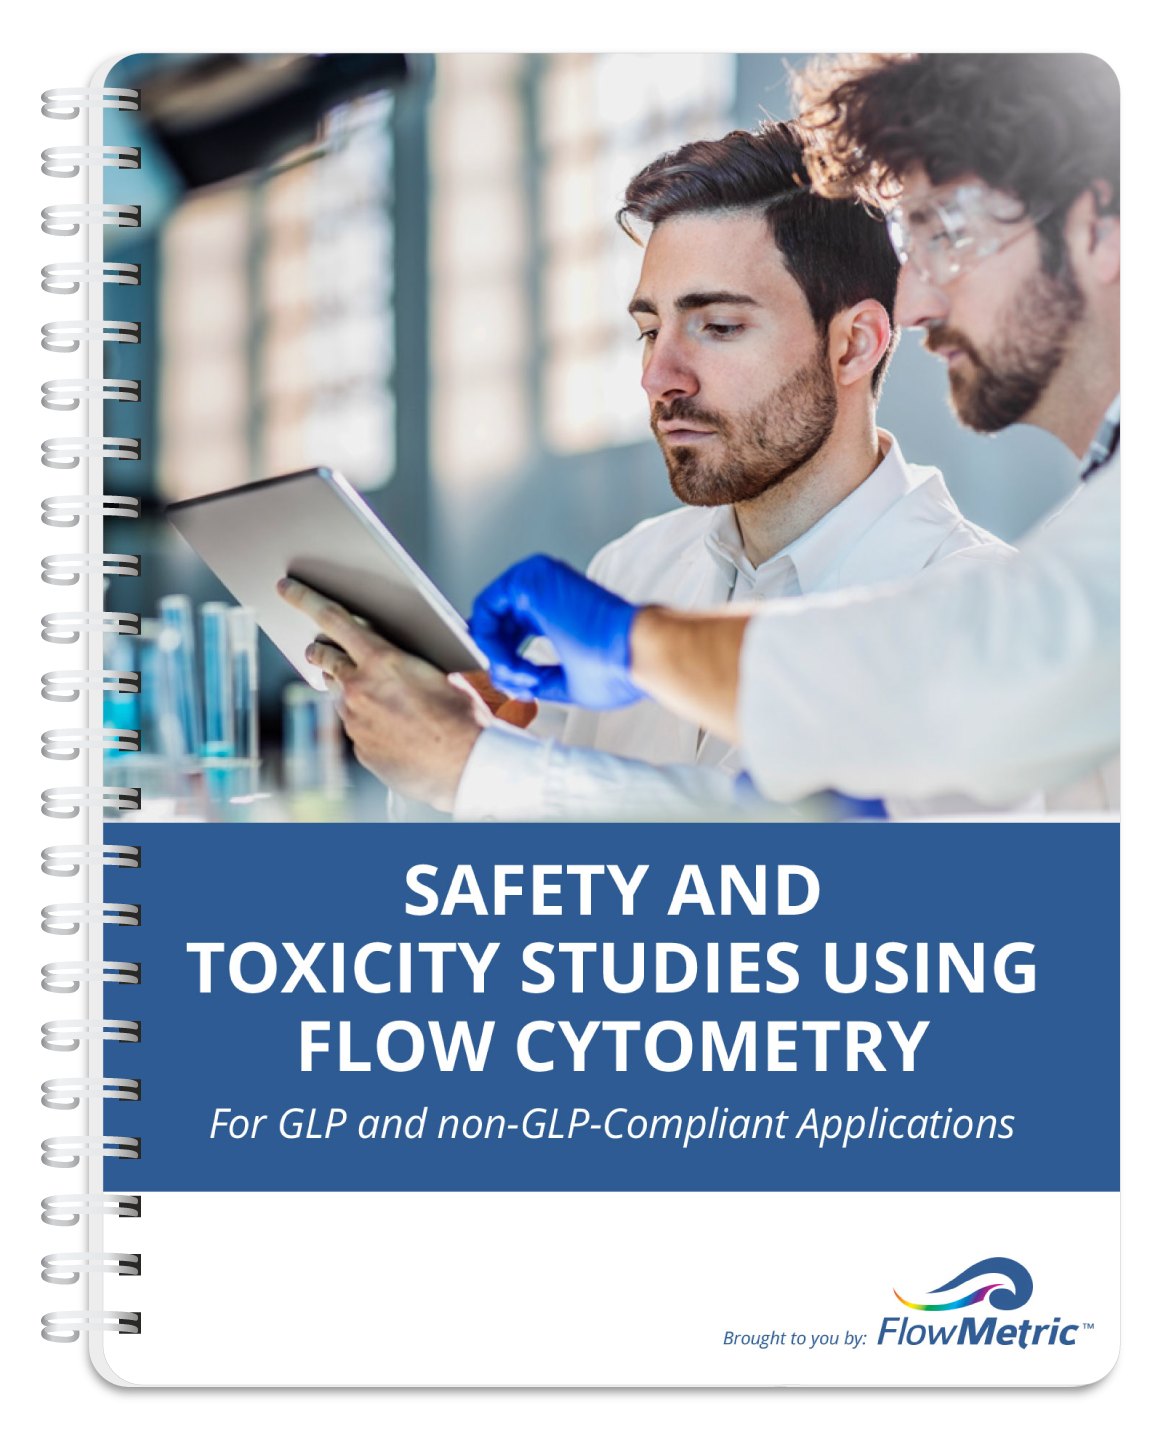 Safety and Toxicity Studies Using Flow Cytometry